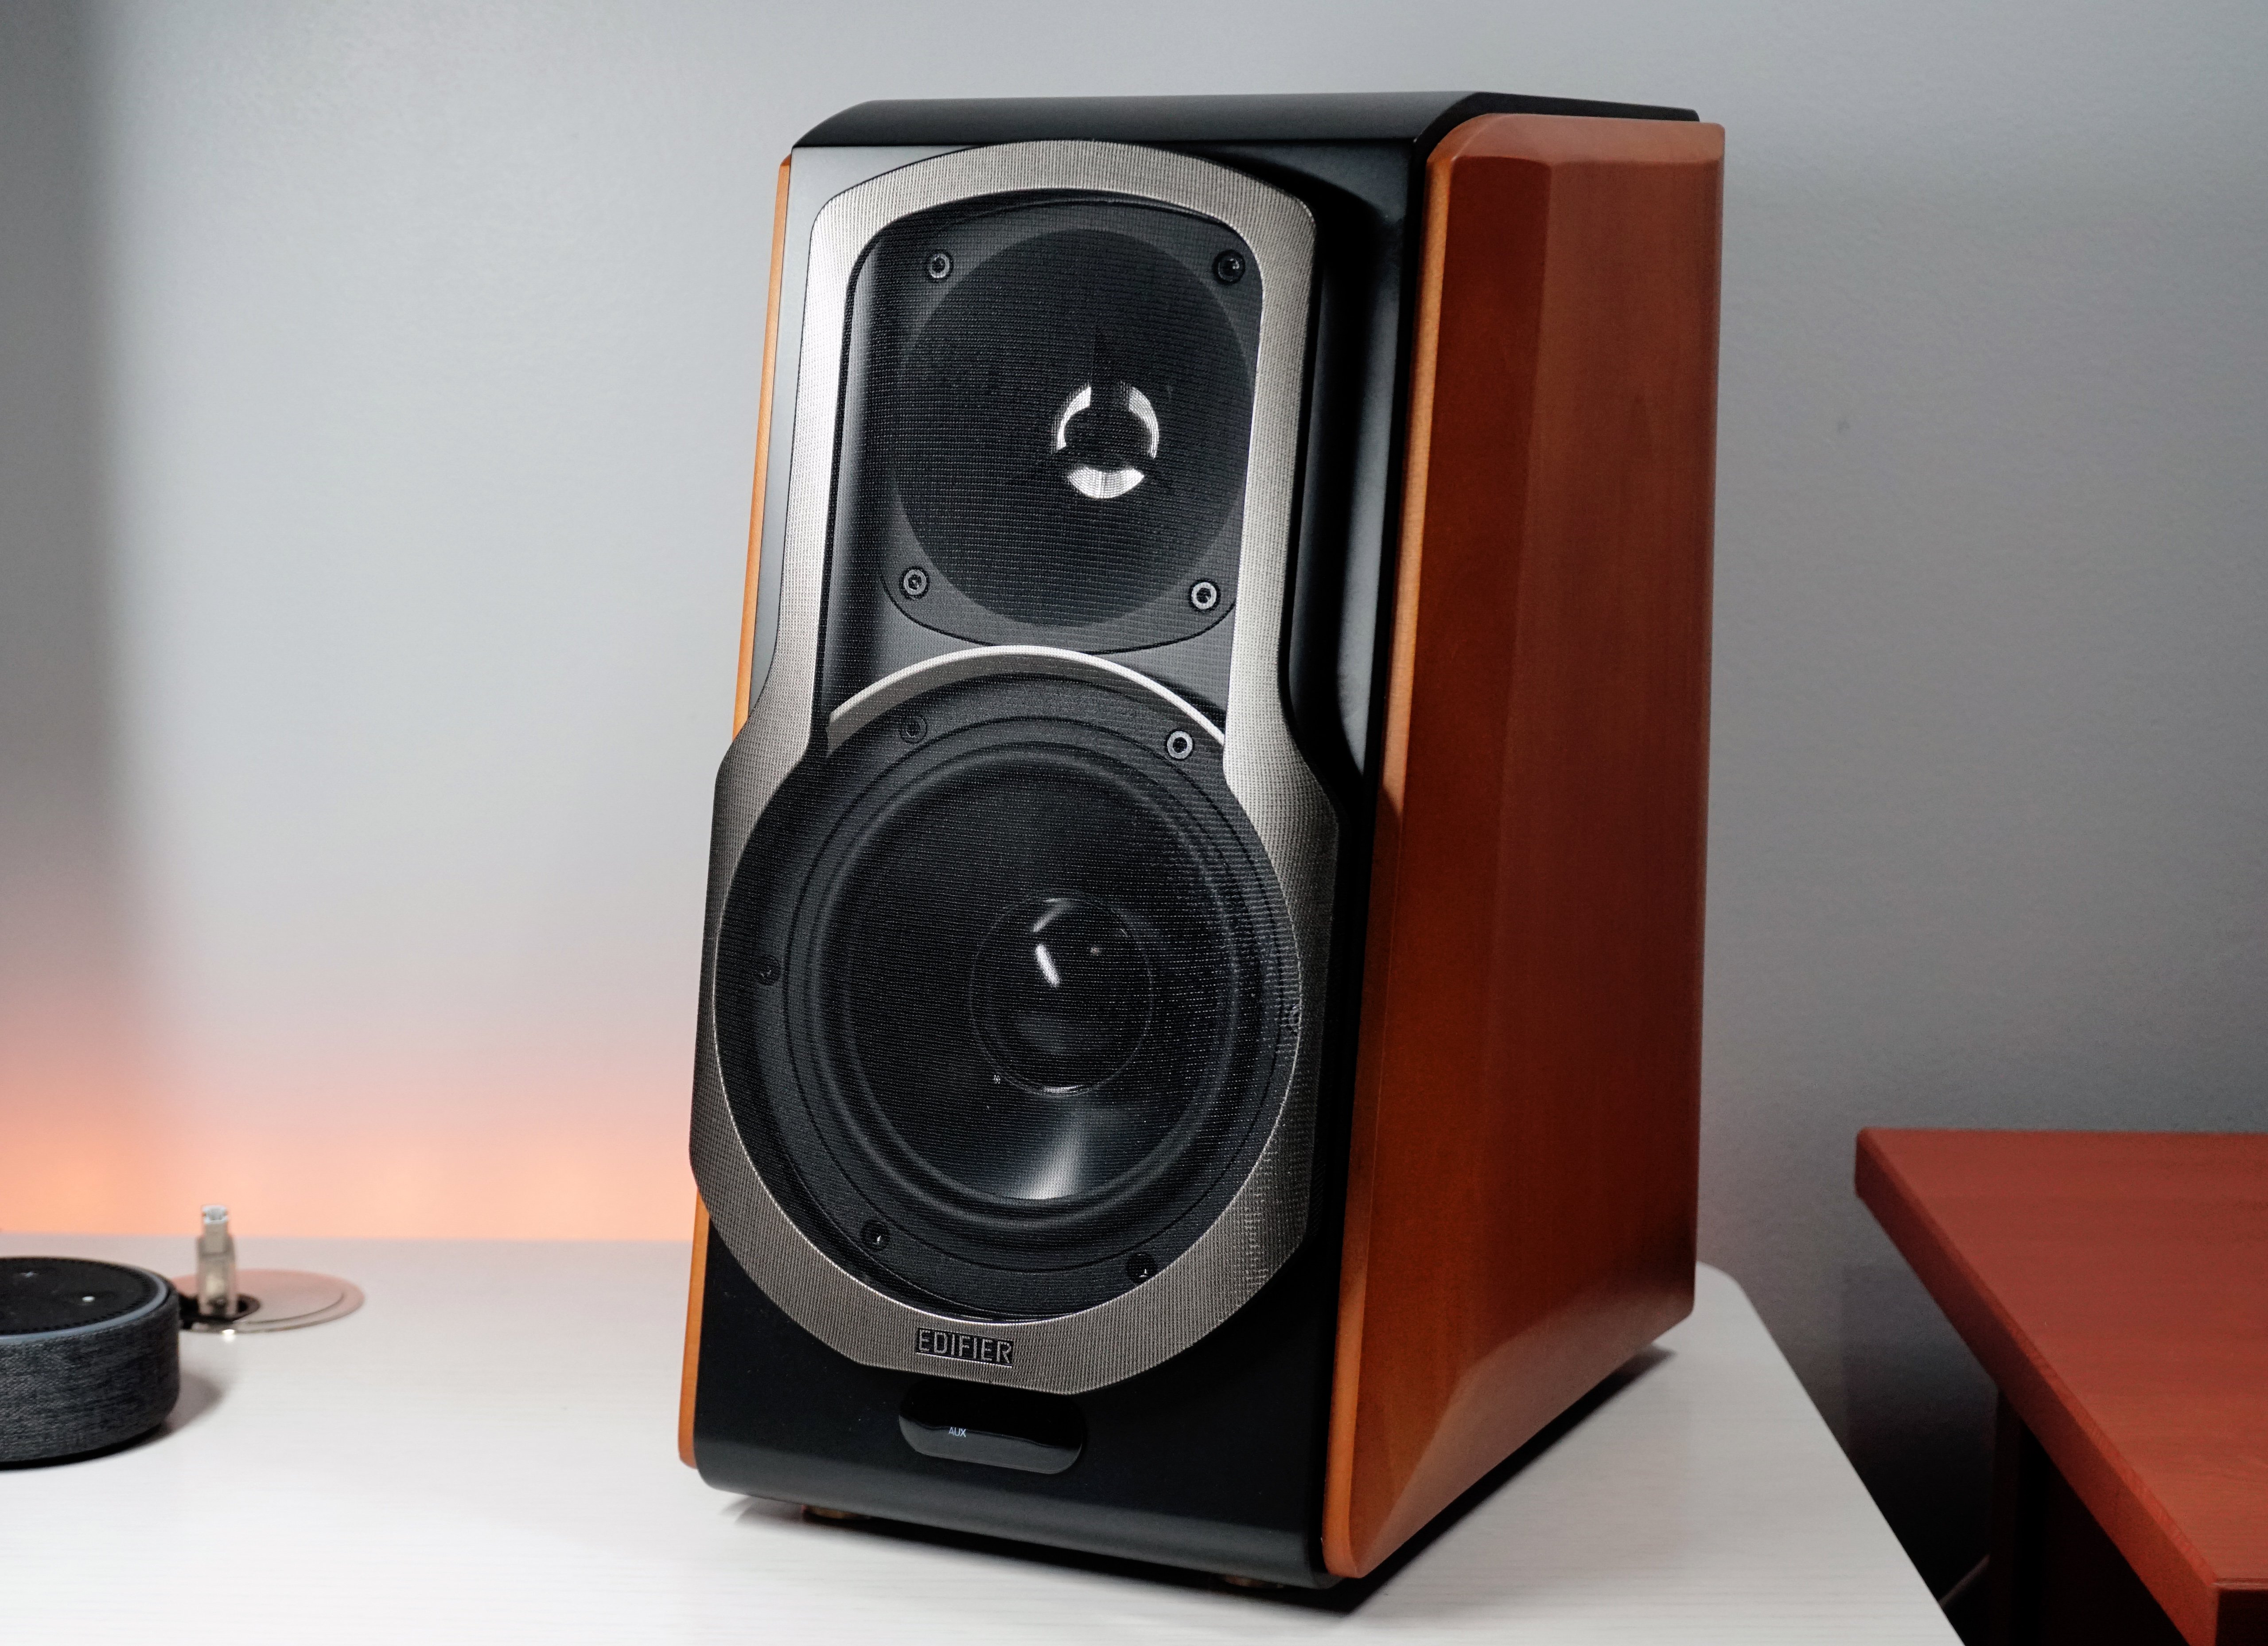 The Edifier S2000 Pro speakers sound good and look good.